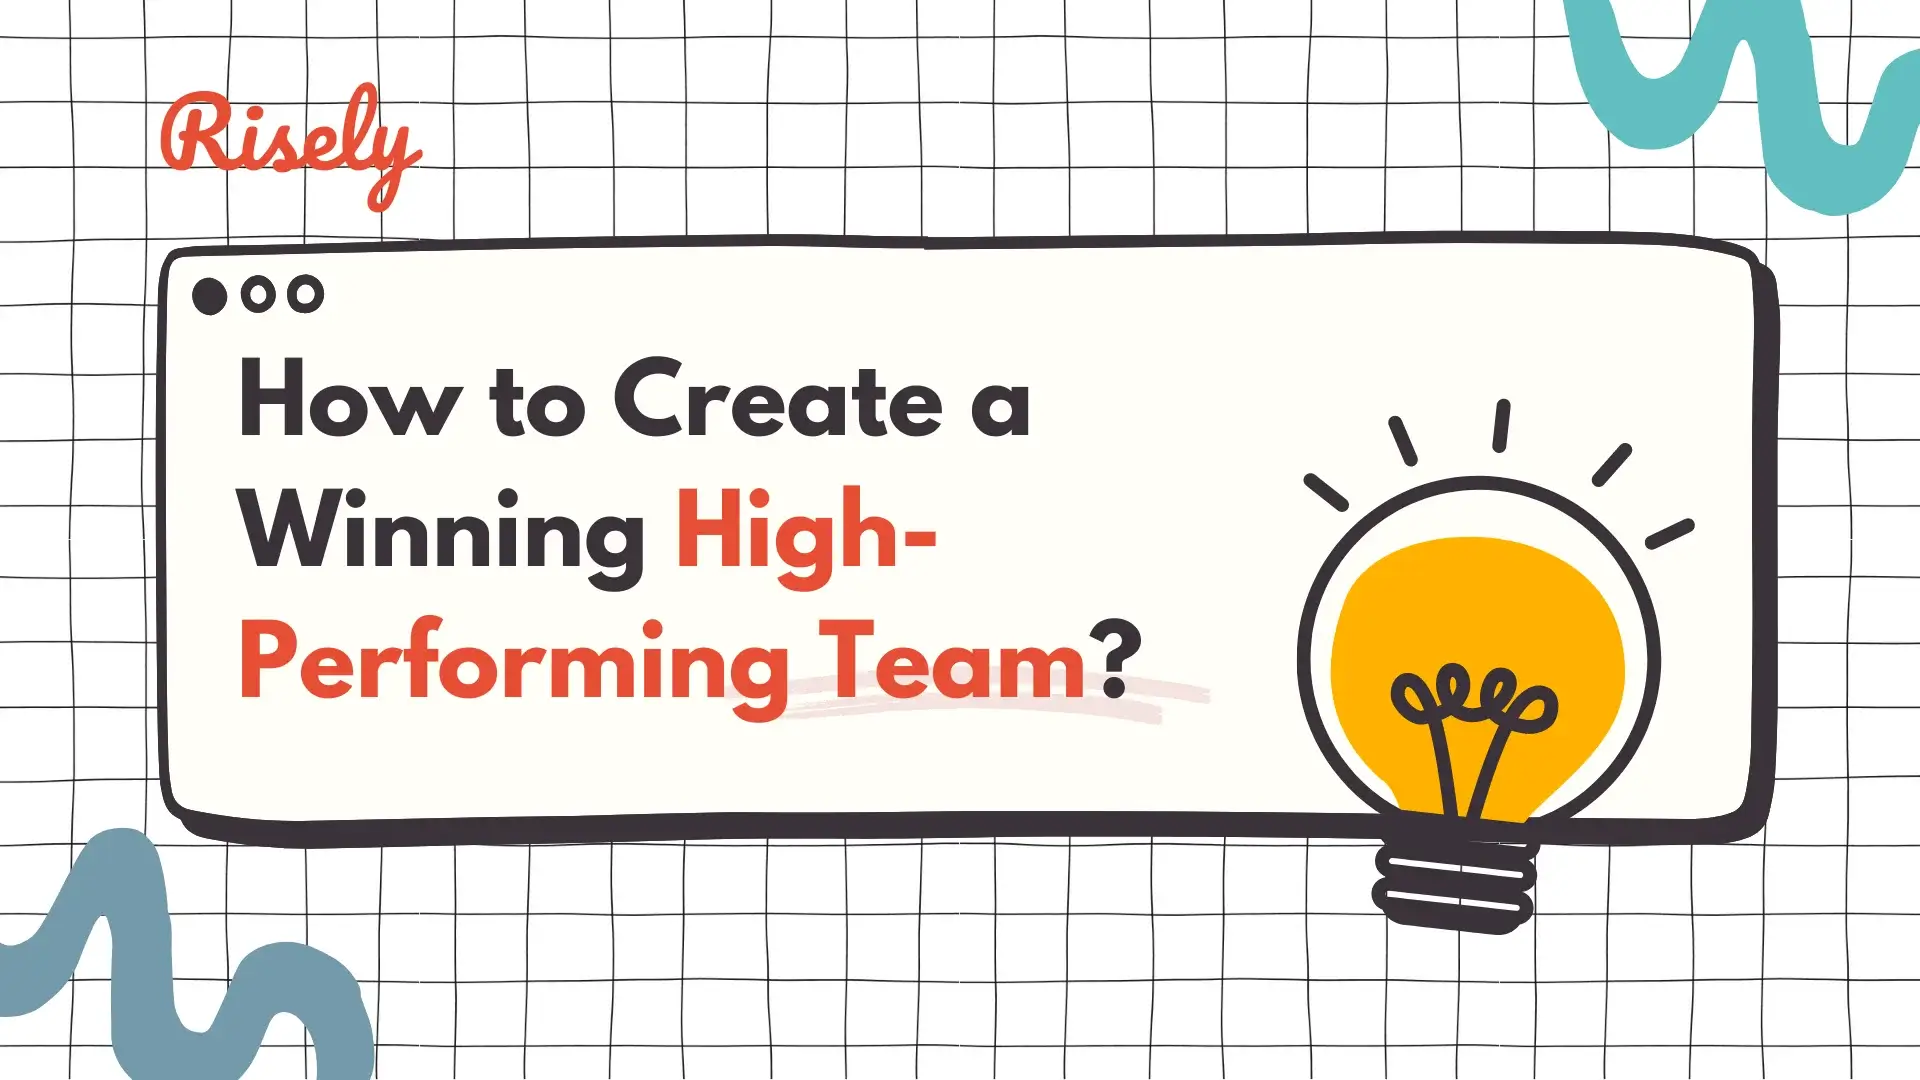 How to Build a High-Performing Team?